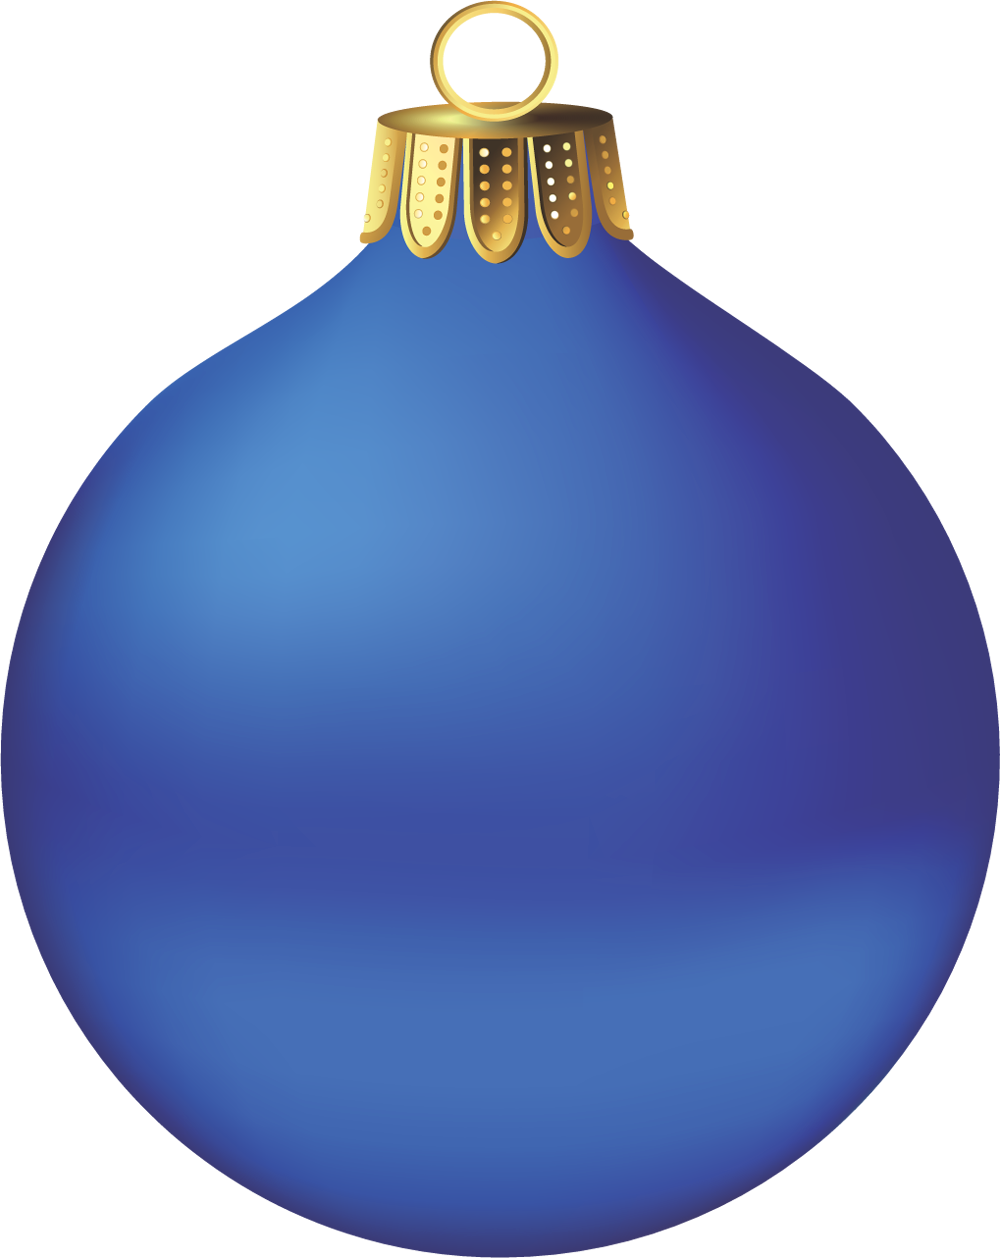 Free Christmas Ornament Clip Art, Download Free Christmas Ornament Clip